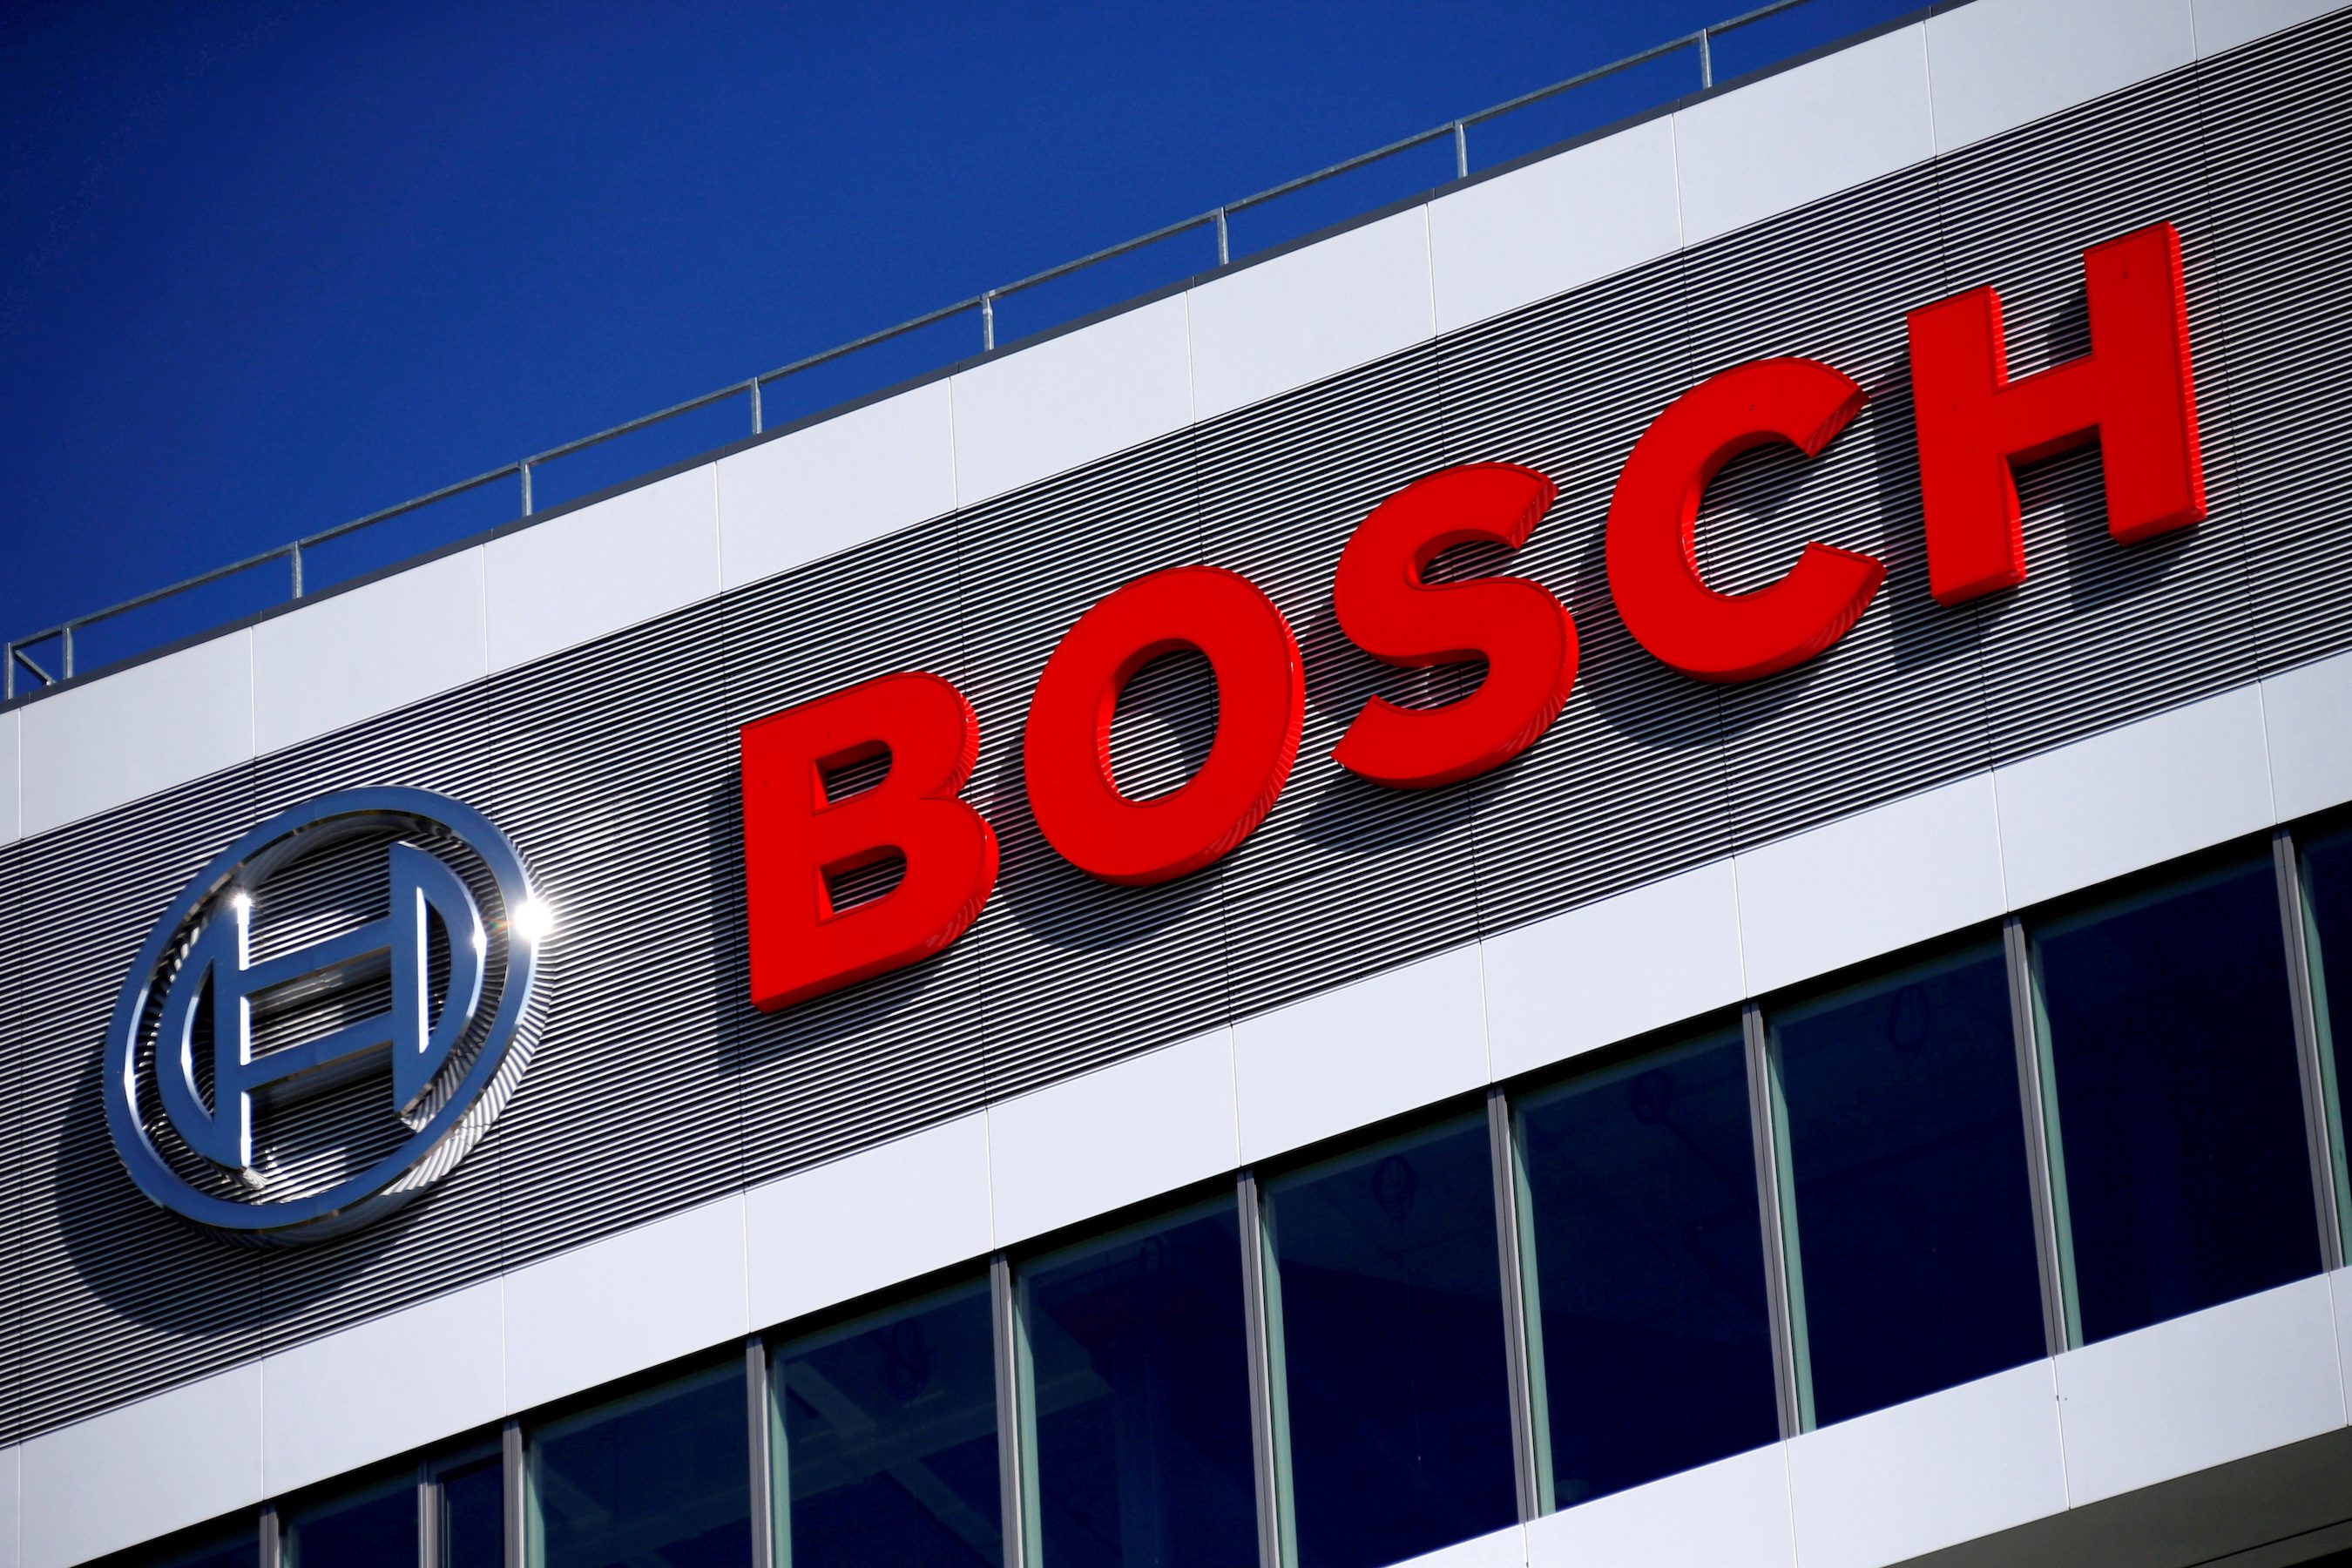 Germany probes some Bosch exports to Russia, Der Spiegel says